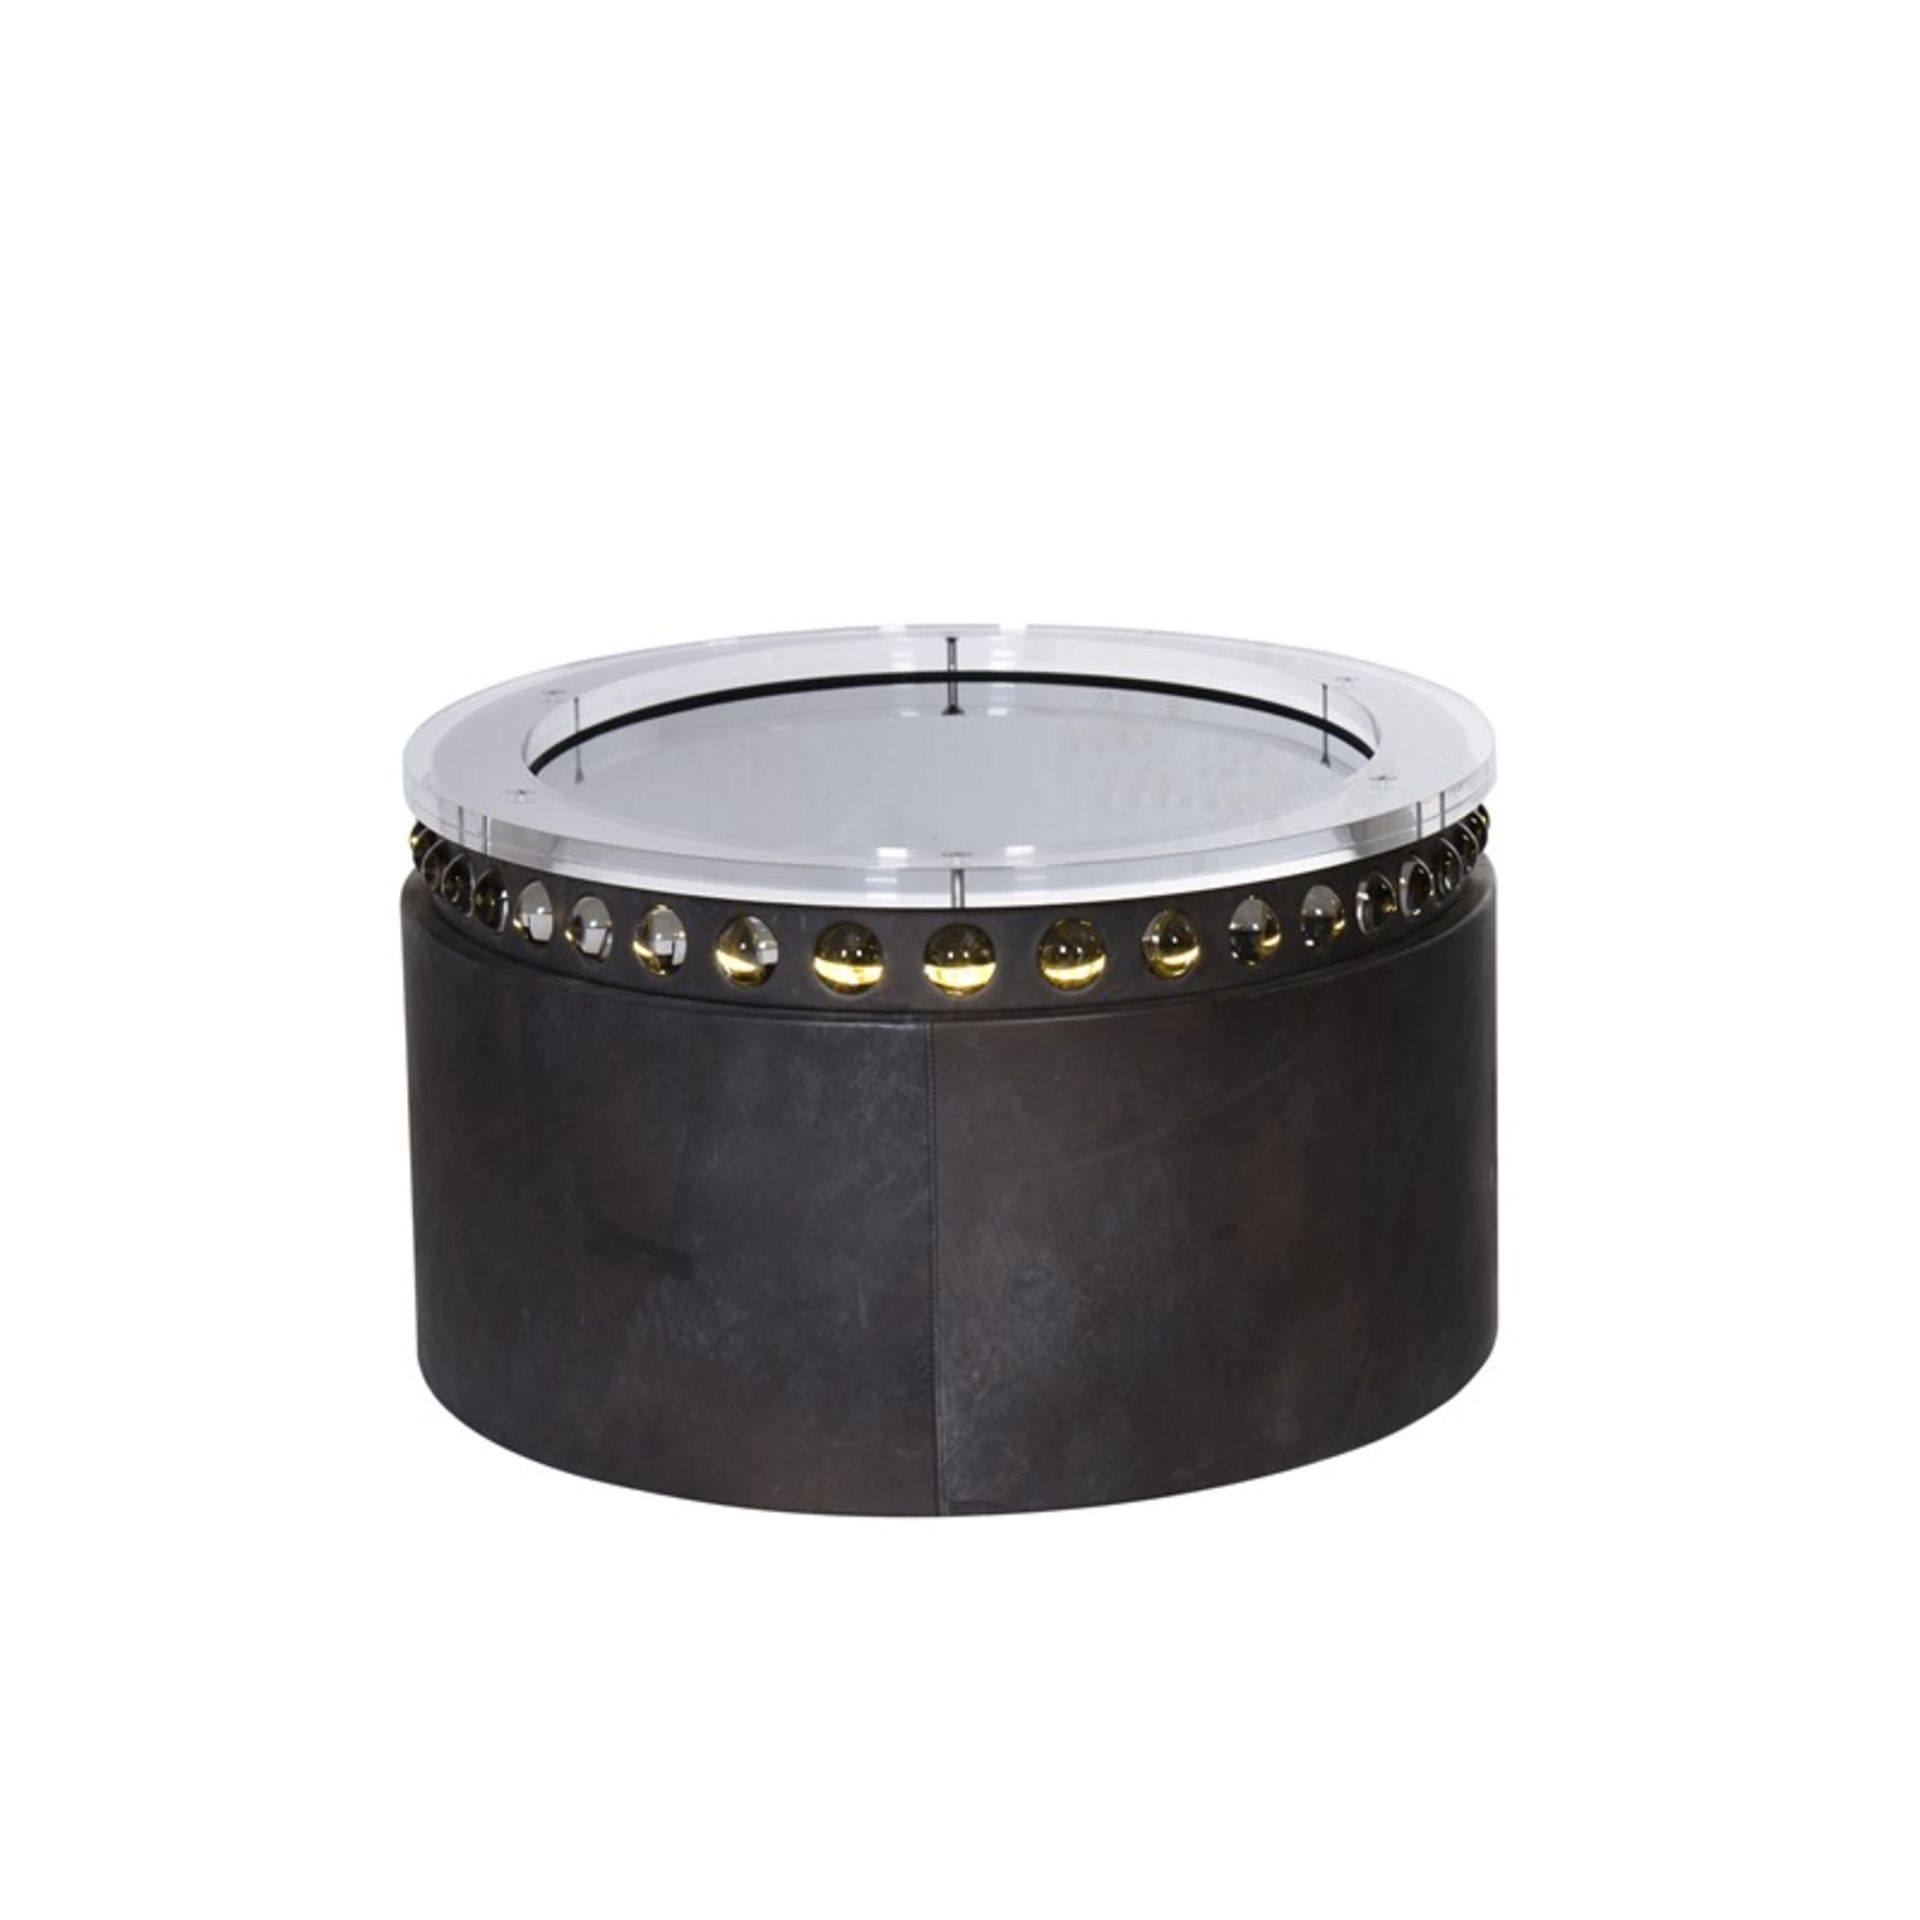 Honey Pot Coffee Table A vision of the Roaring Twenties and nights spent at glamorous parties